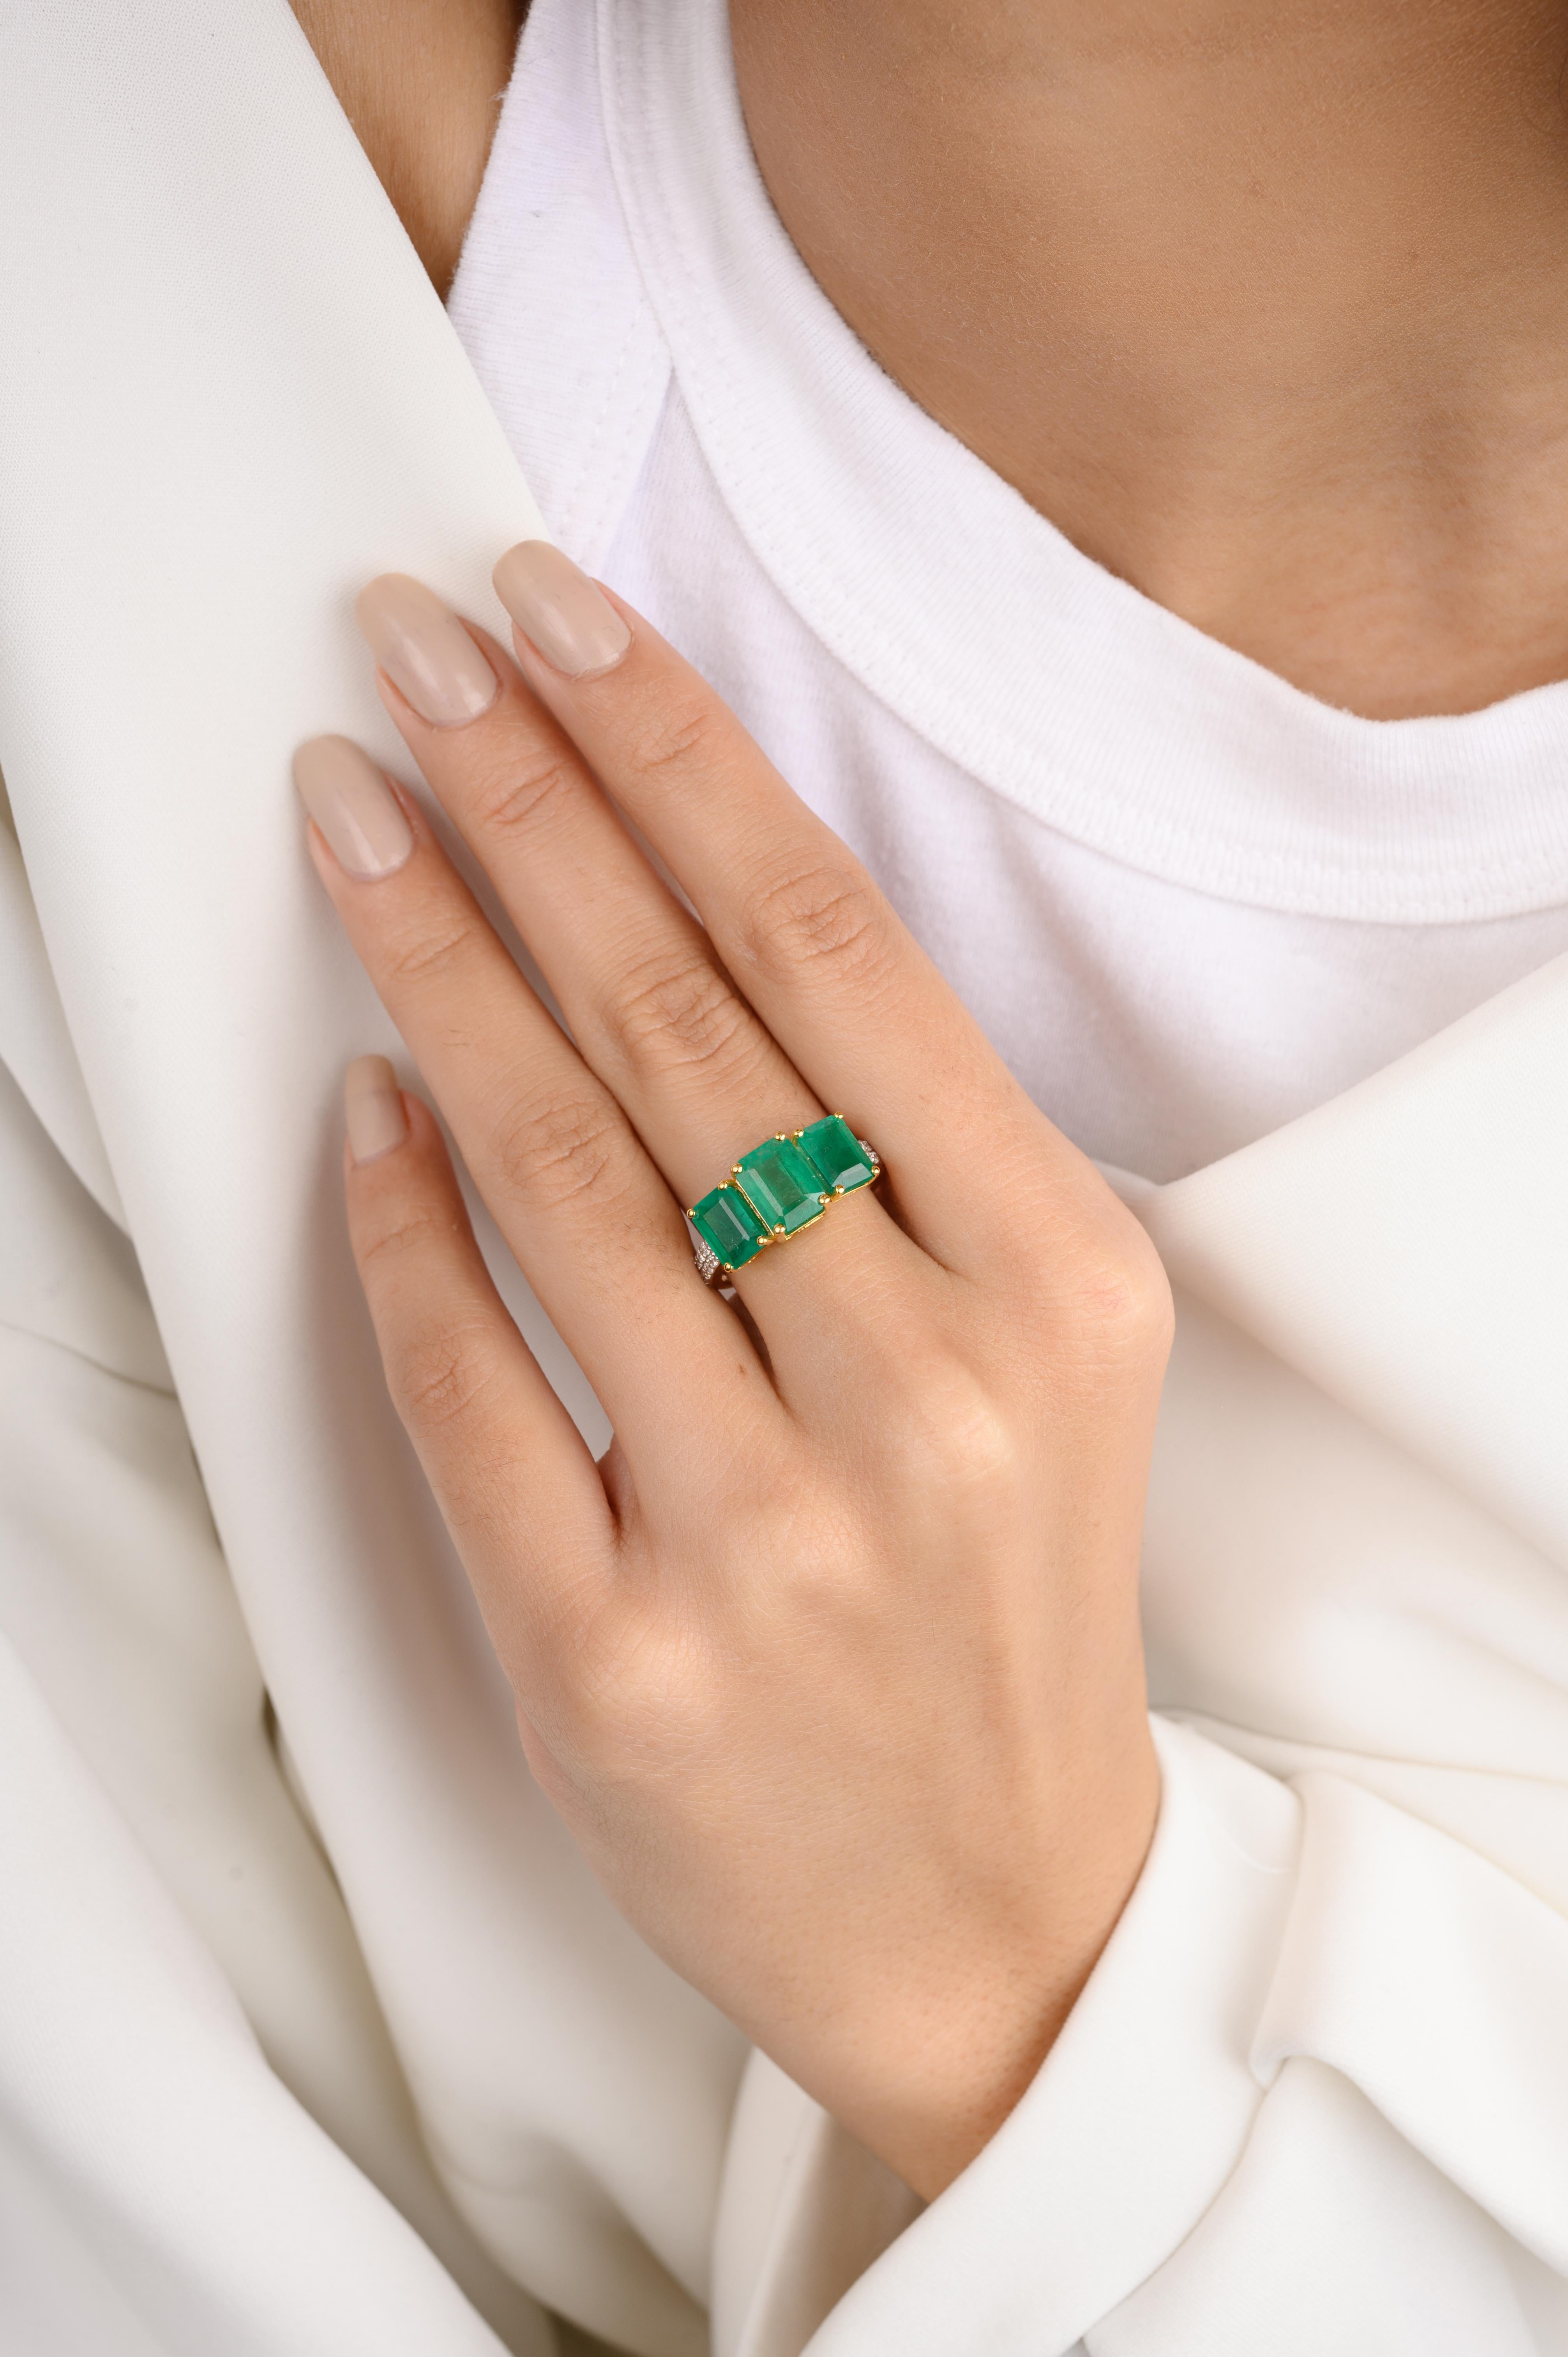 For Sale:  4.14 CTW Three Stone Genuine Emerald Ring with Diamonds in 18k Yellow Gold  2